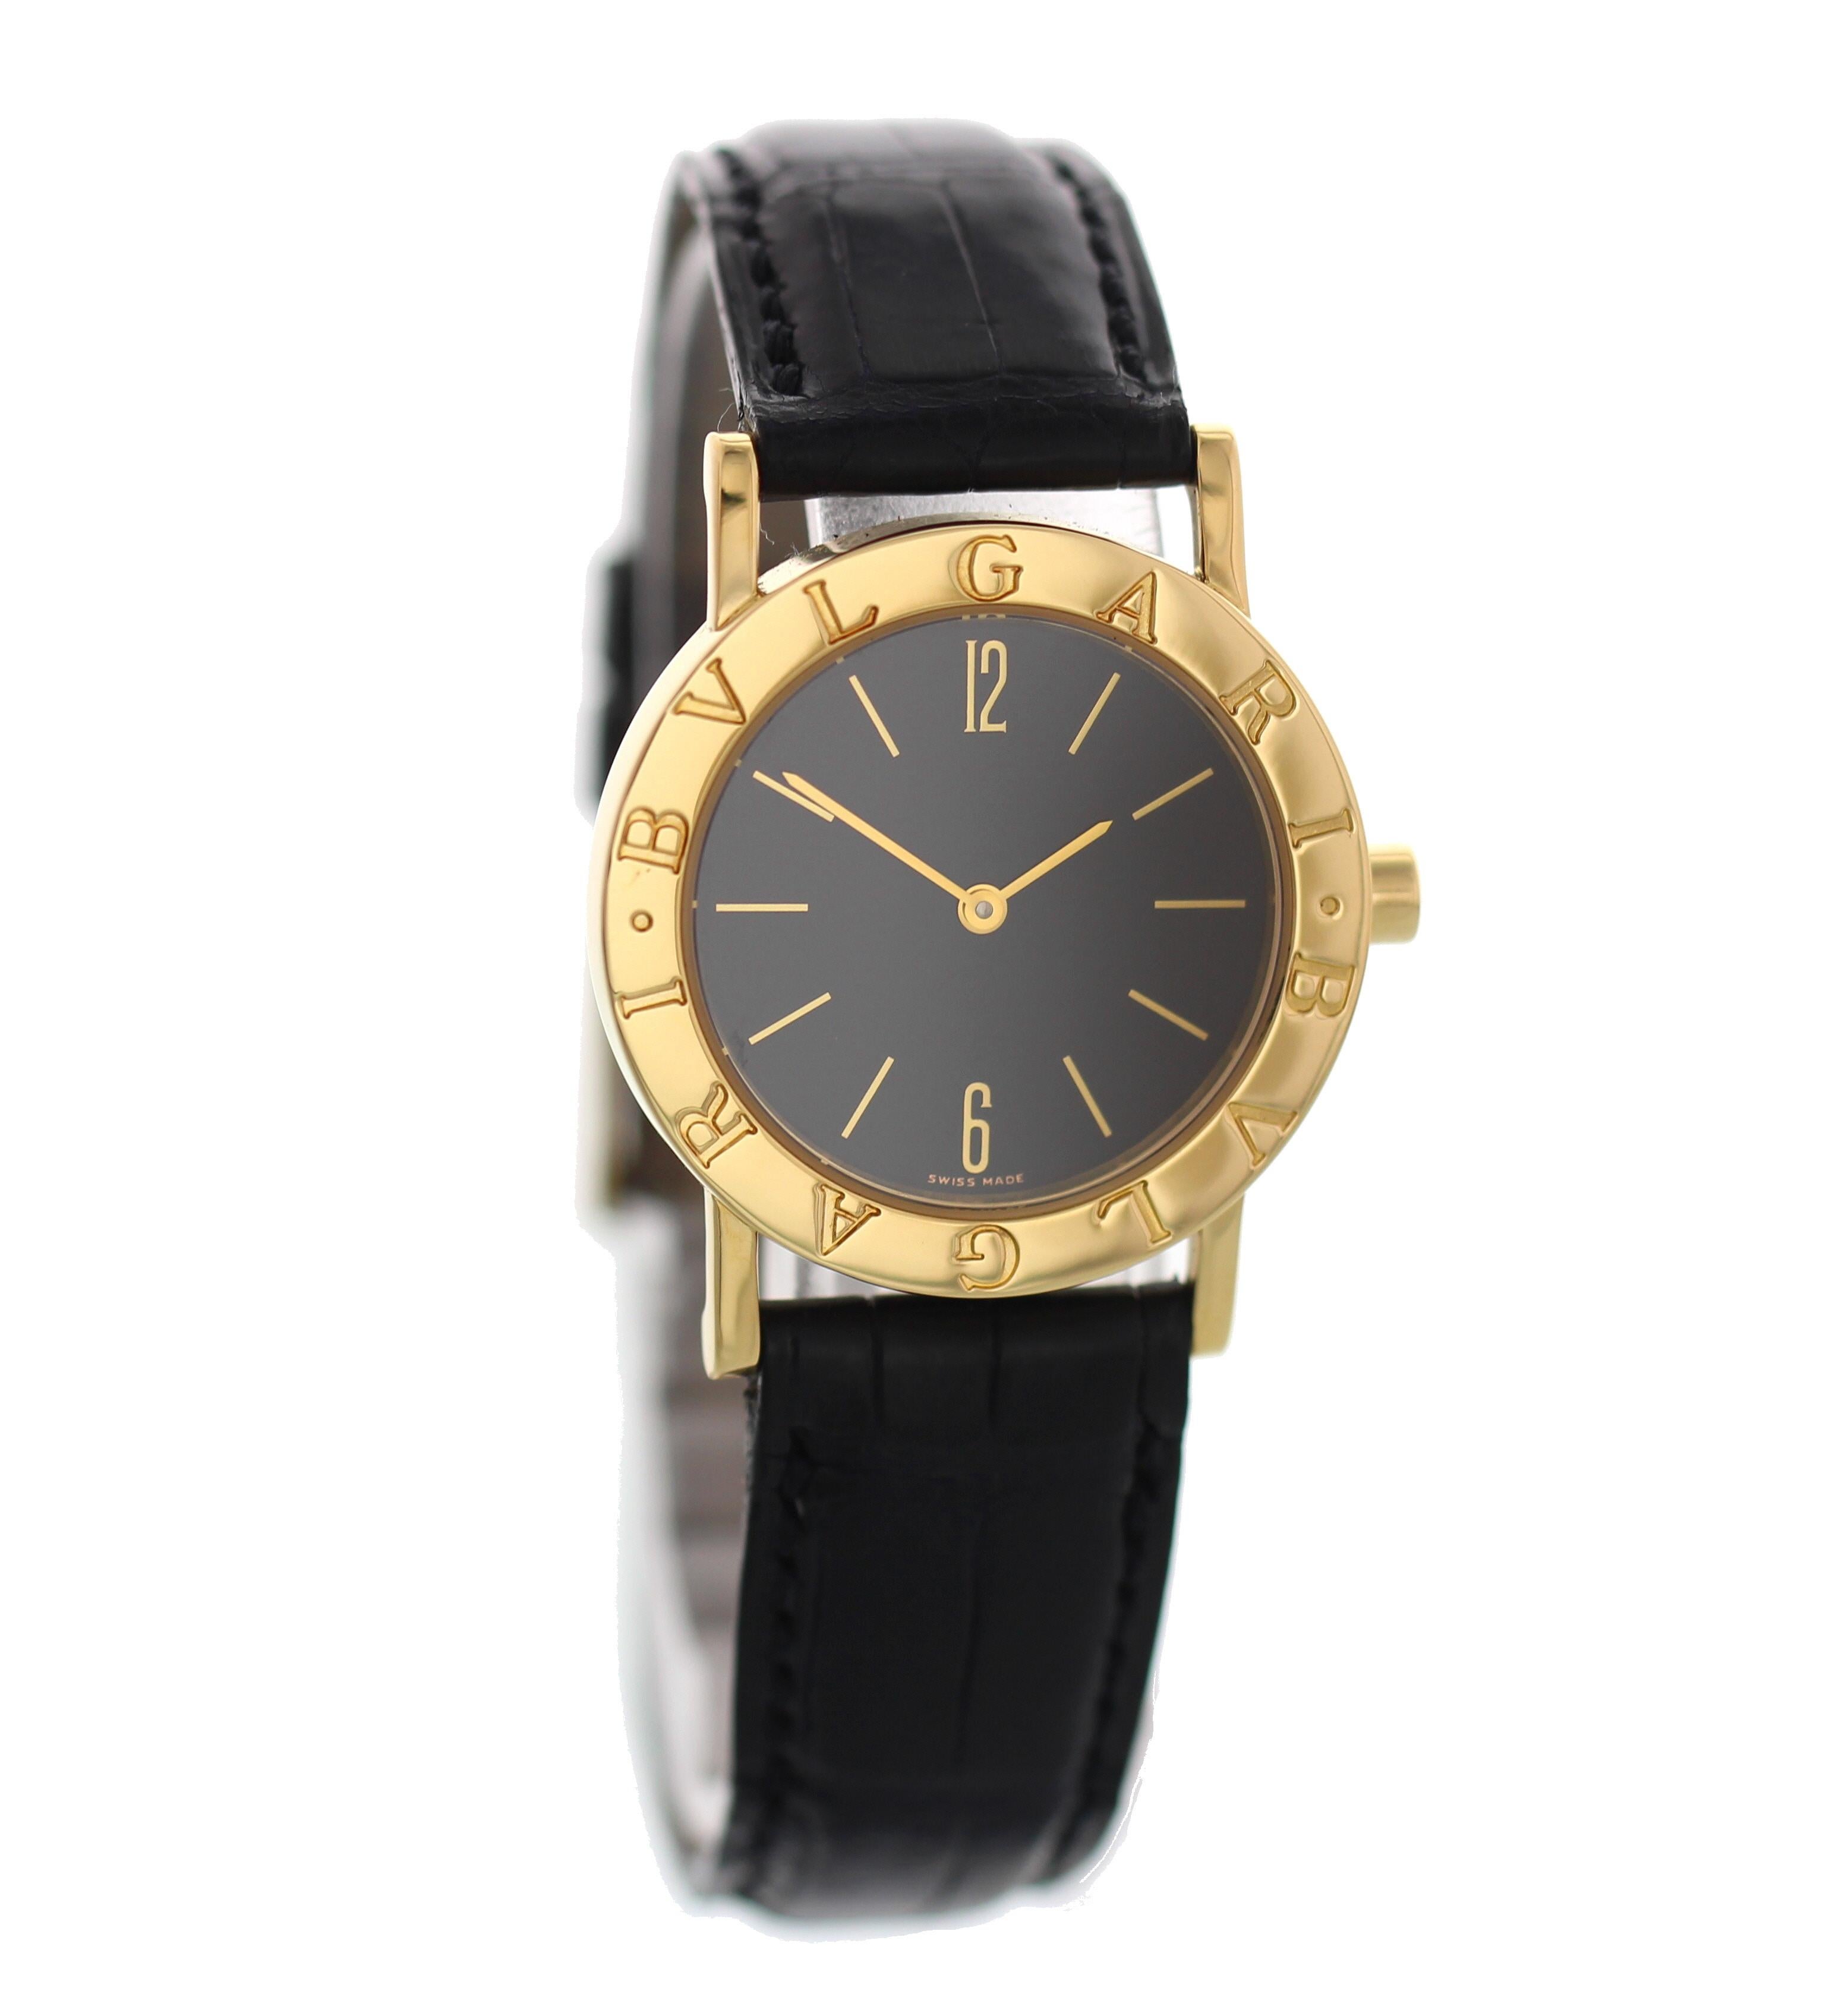 Ladies midsize Bvlgari gold watch. 18k yellow gold 30mm case with 'BVLGARI' engraving. Black dial with gold indexes and hands. Black leather Bvlgaristrap with an 18k yellow gold buckle.  Quartz battery movement. 

This watch is backed by our one